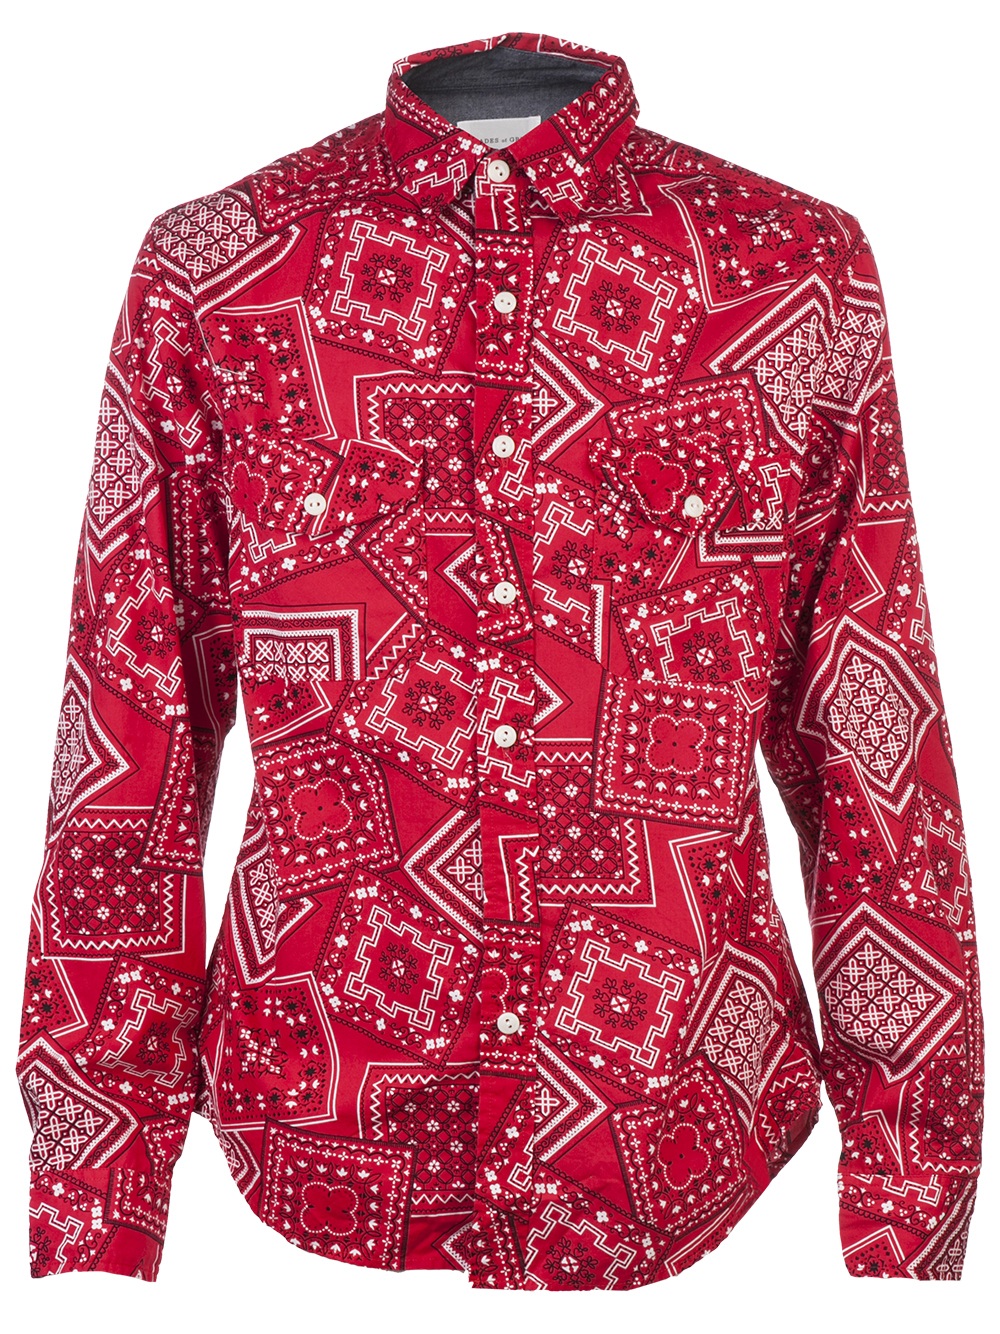 Lyst - Shades Of Grey By Micah Cohen Two Pocket Bandana Shirt in Red